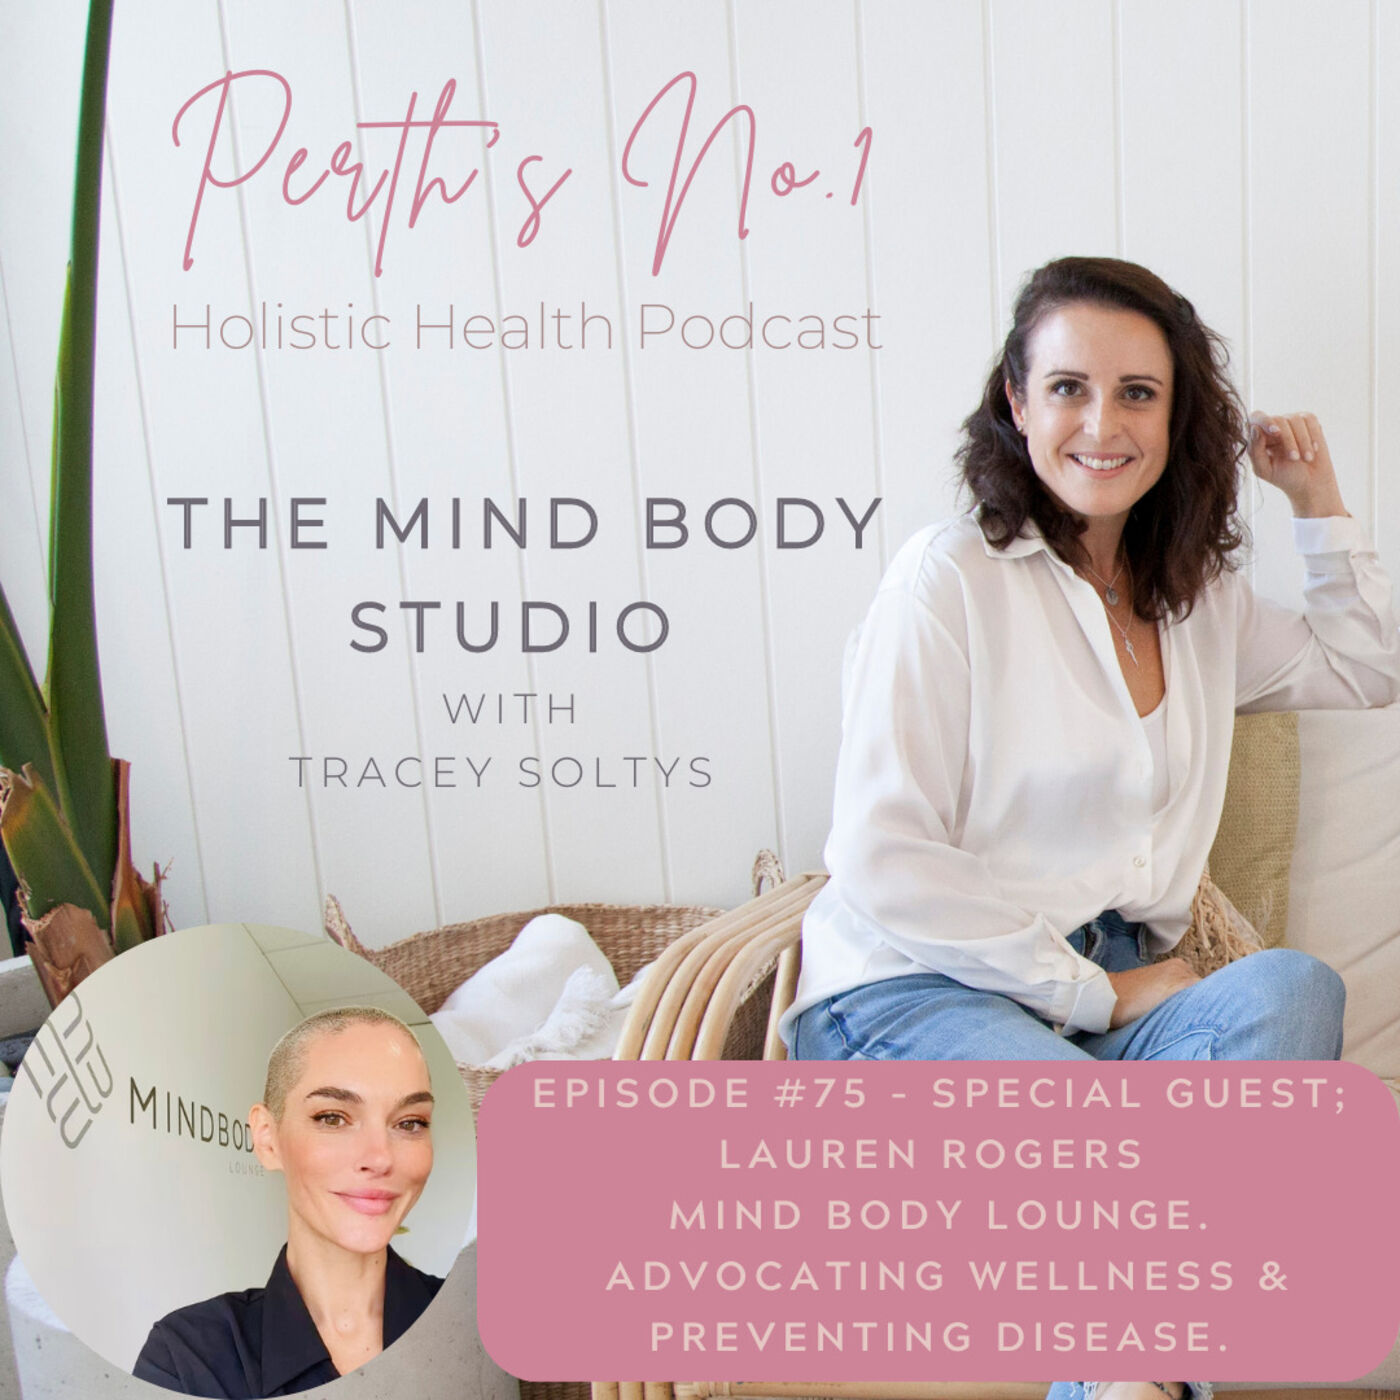 SPECIAL GUEST; Lauren Rogers from Mind Body Lounge - Advocating Wellness & Preventing Disease.